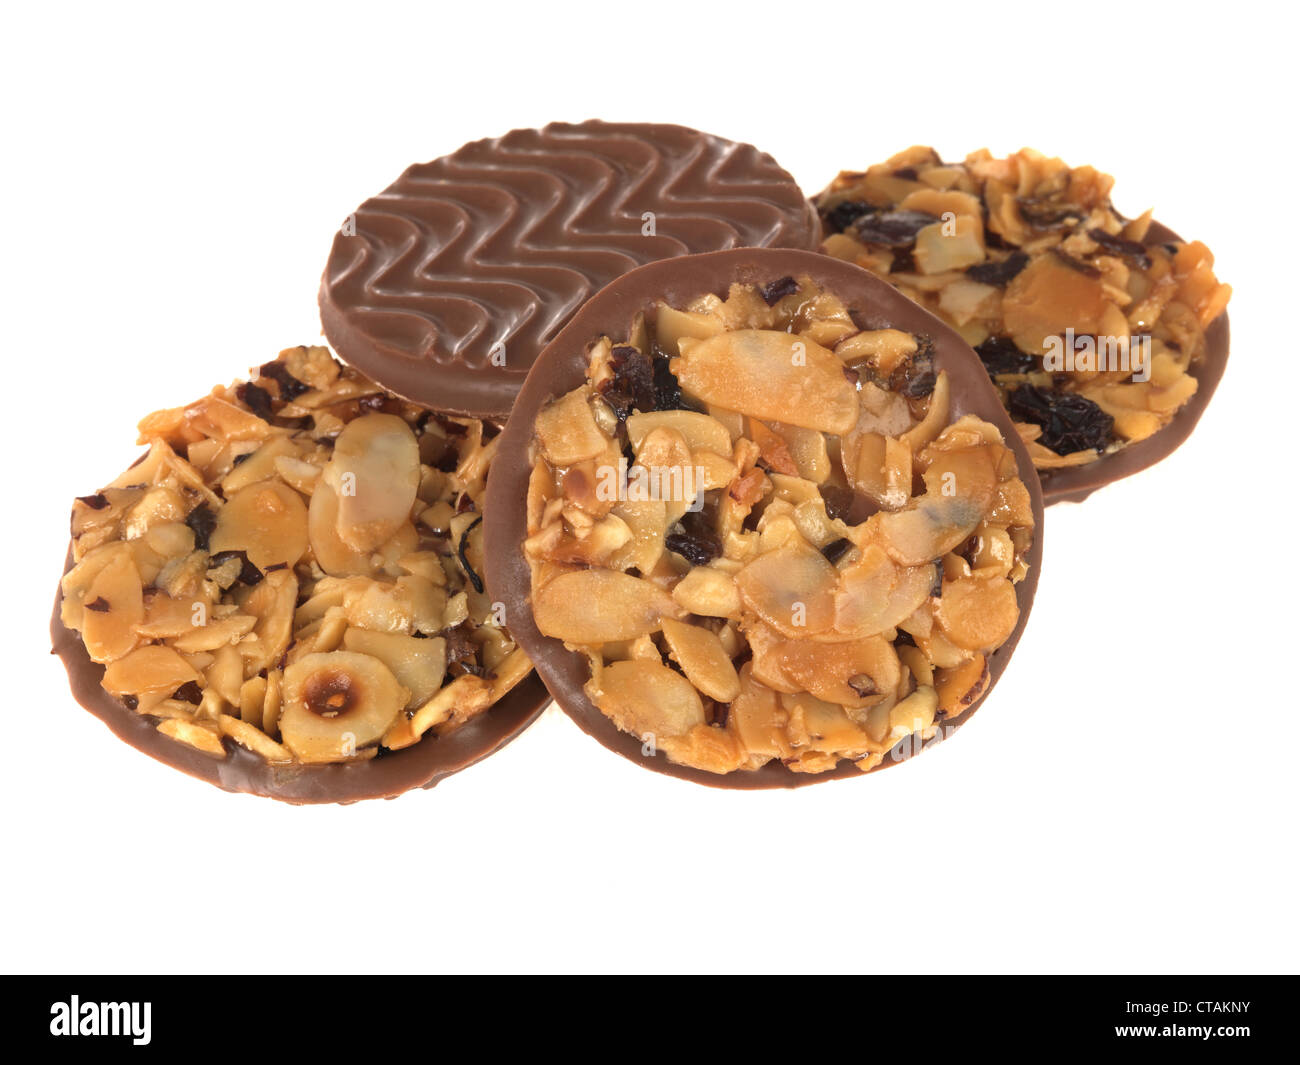 Tasty Luxury Christmas Milk Chocolate Florentines Biscuit Snacks, Isolated Against A White Background, With A Clipping Path And No People Stock Photo